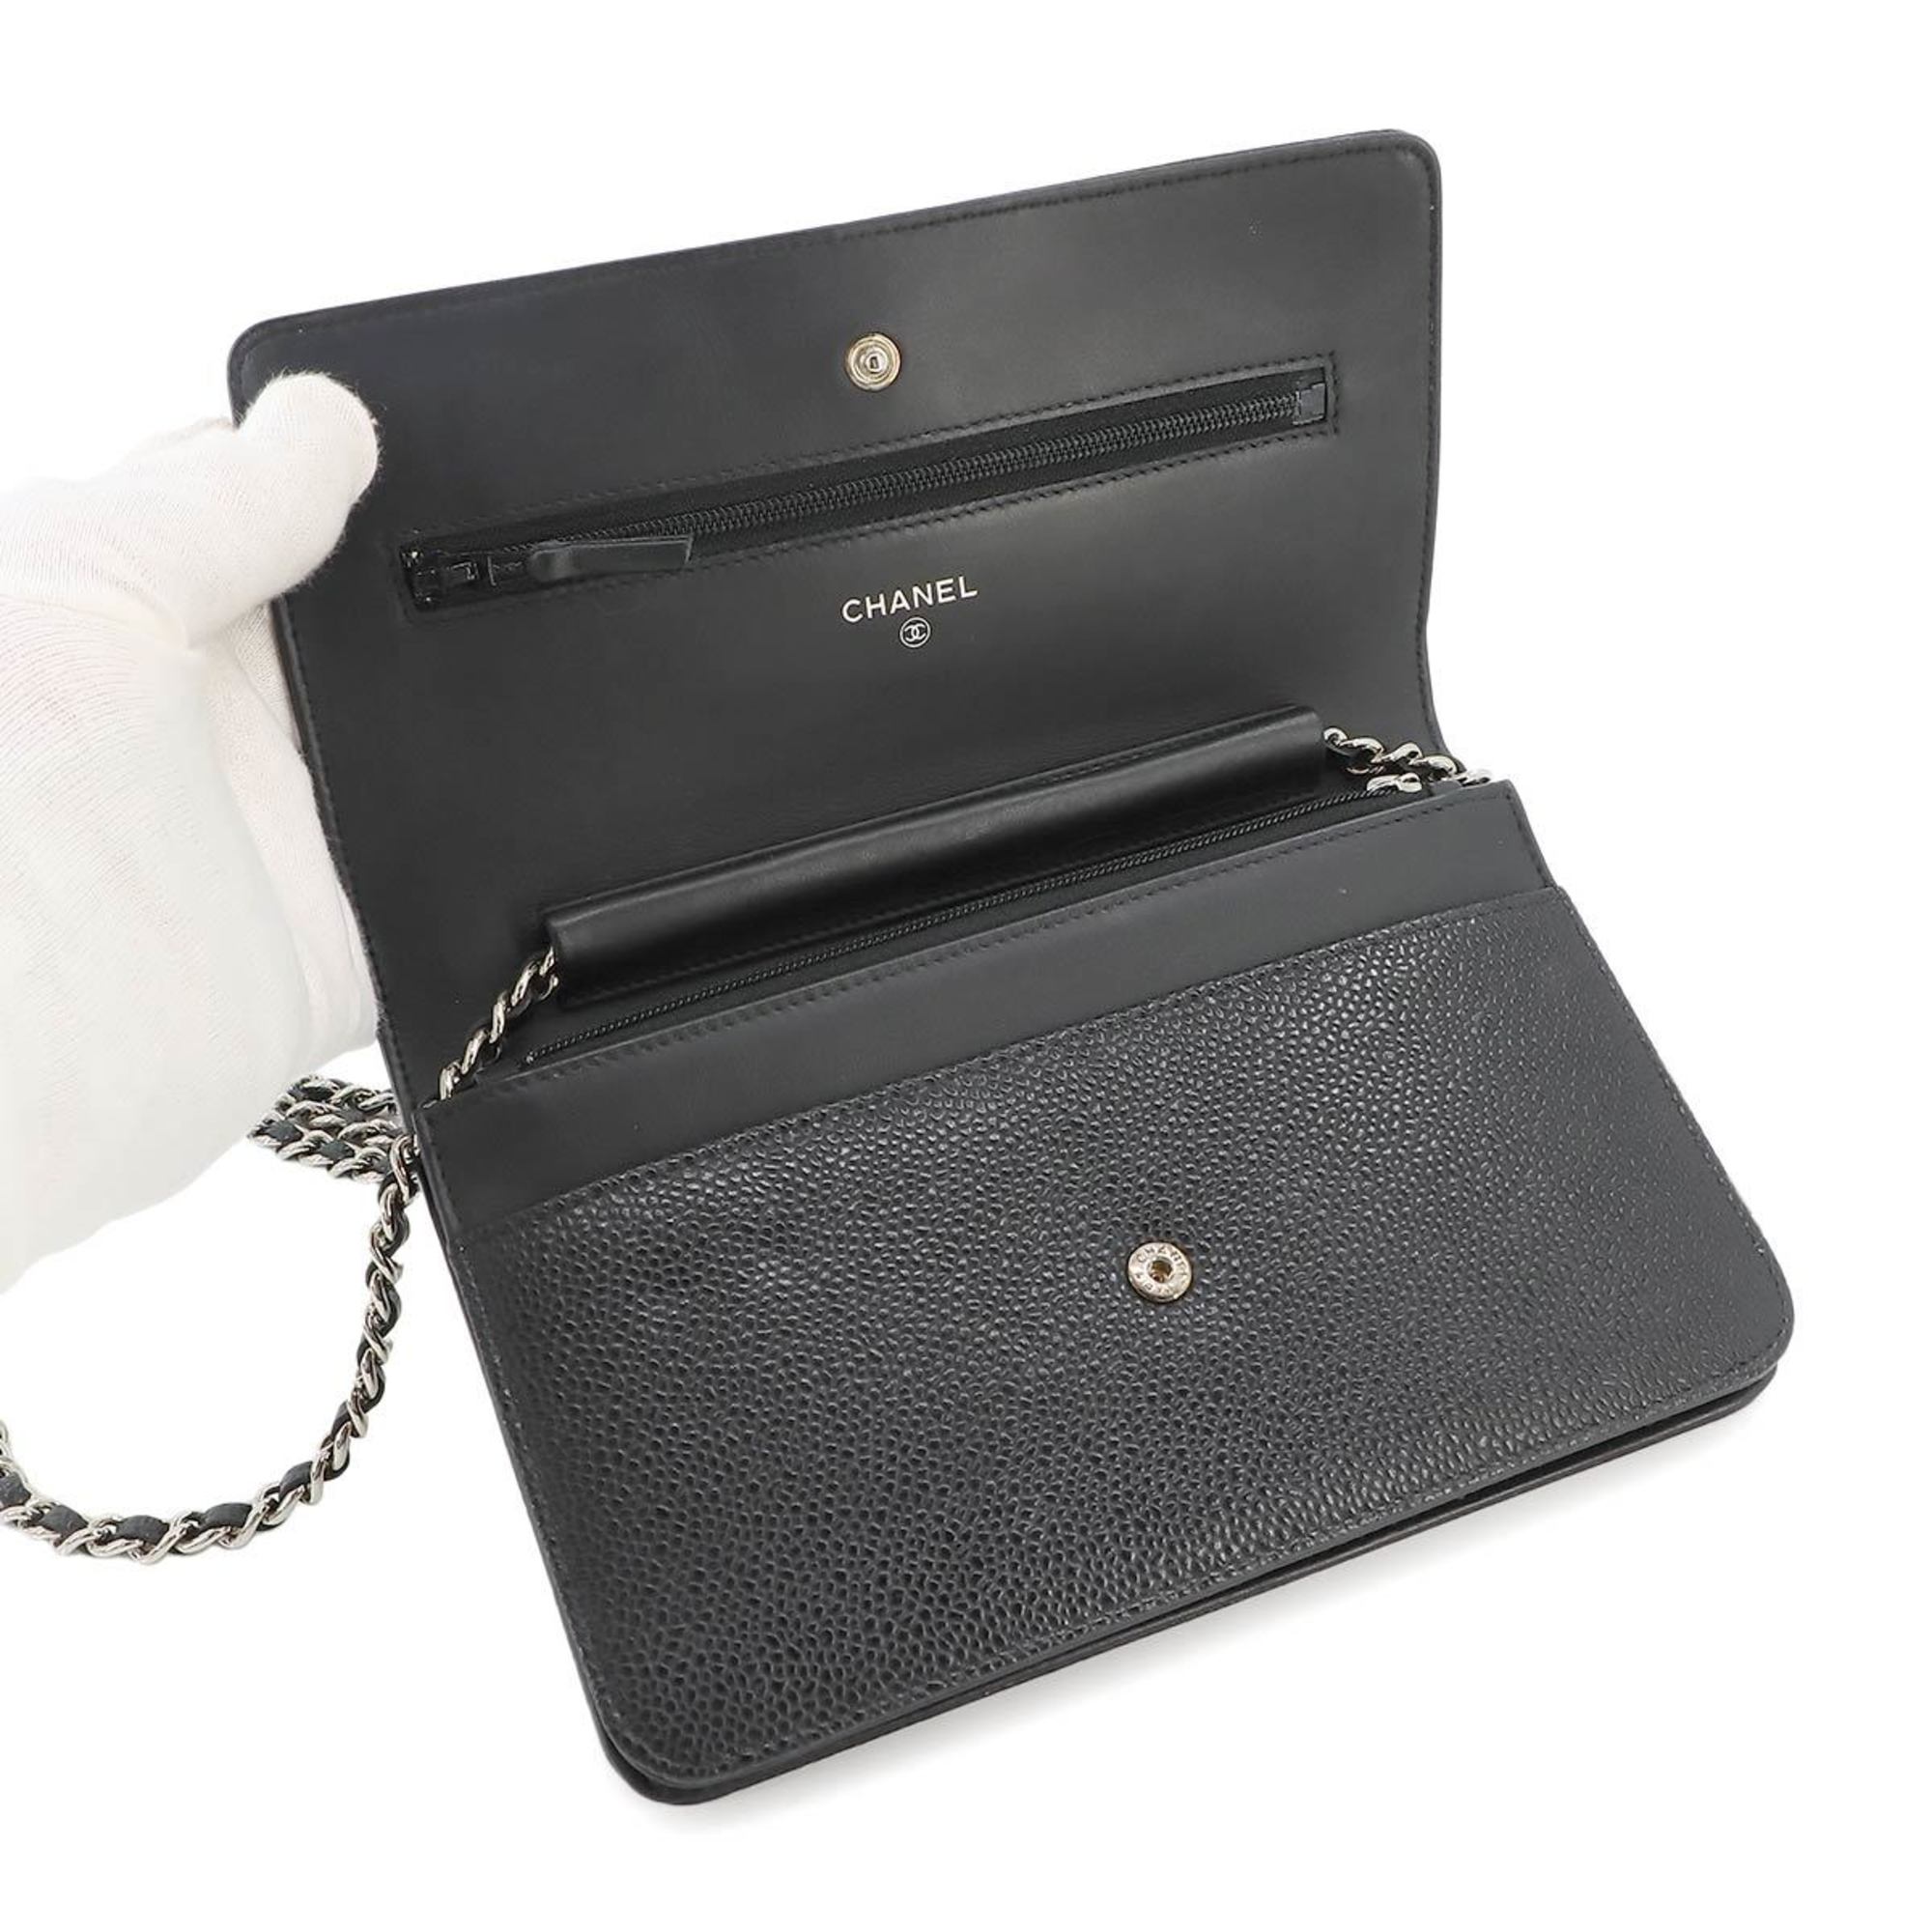 CHANEL Caviar Skin Chain Wallet Long Leather Black 8654 Coco Mark Silver Metal Fittings